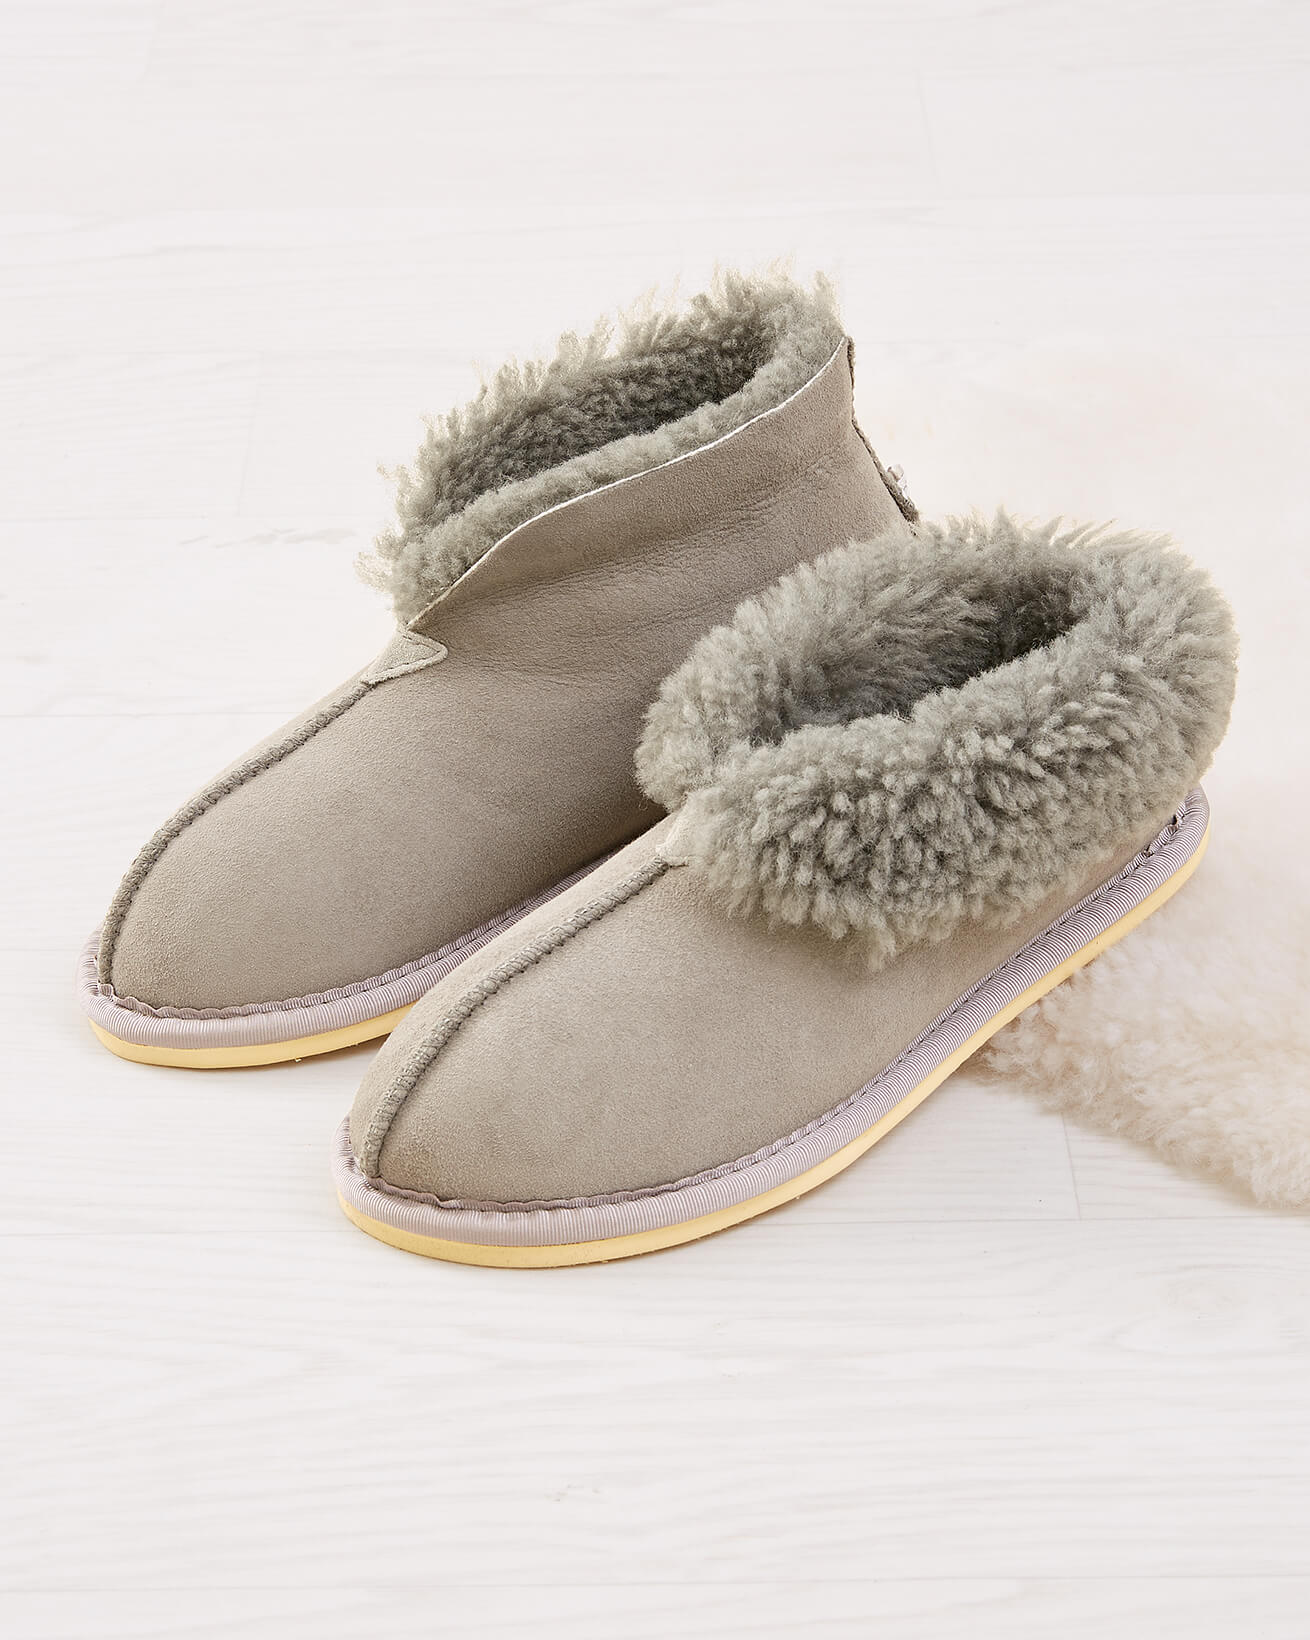 Ladies' Shearling Bootee Slippers